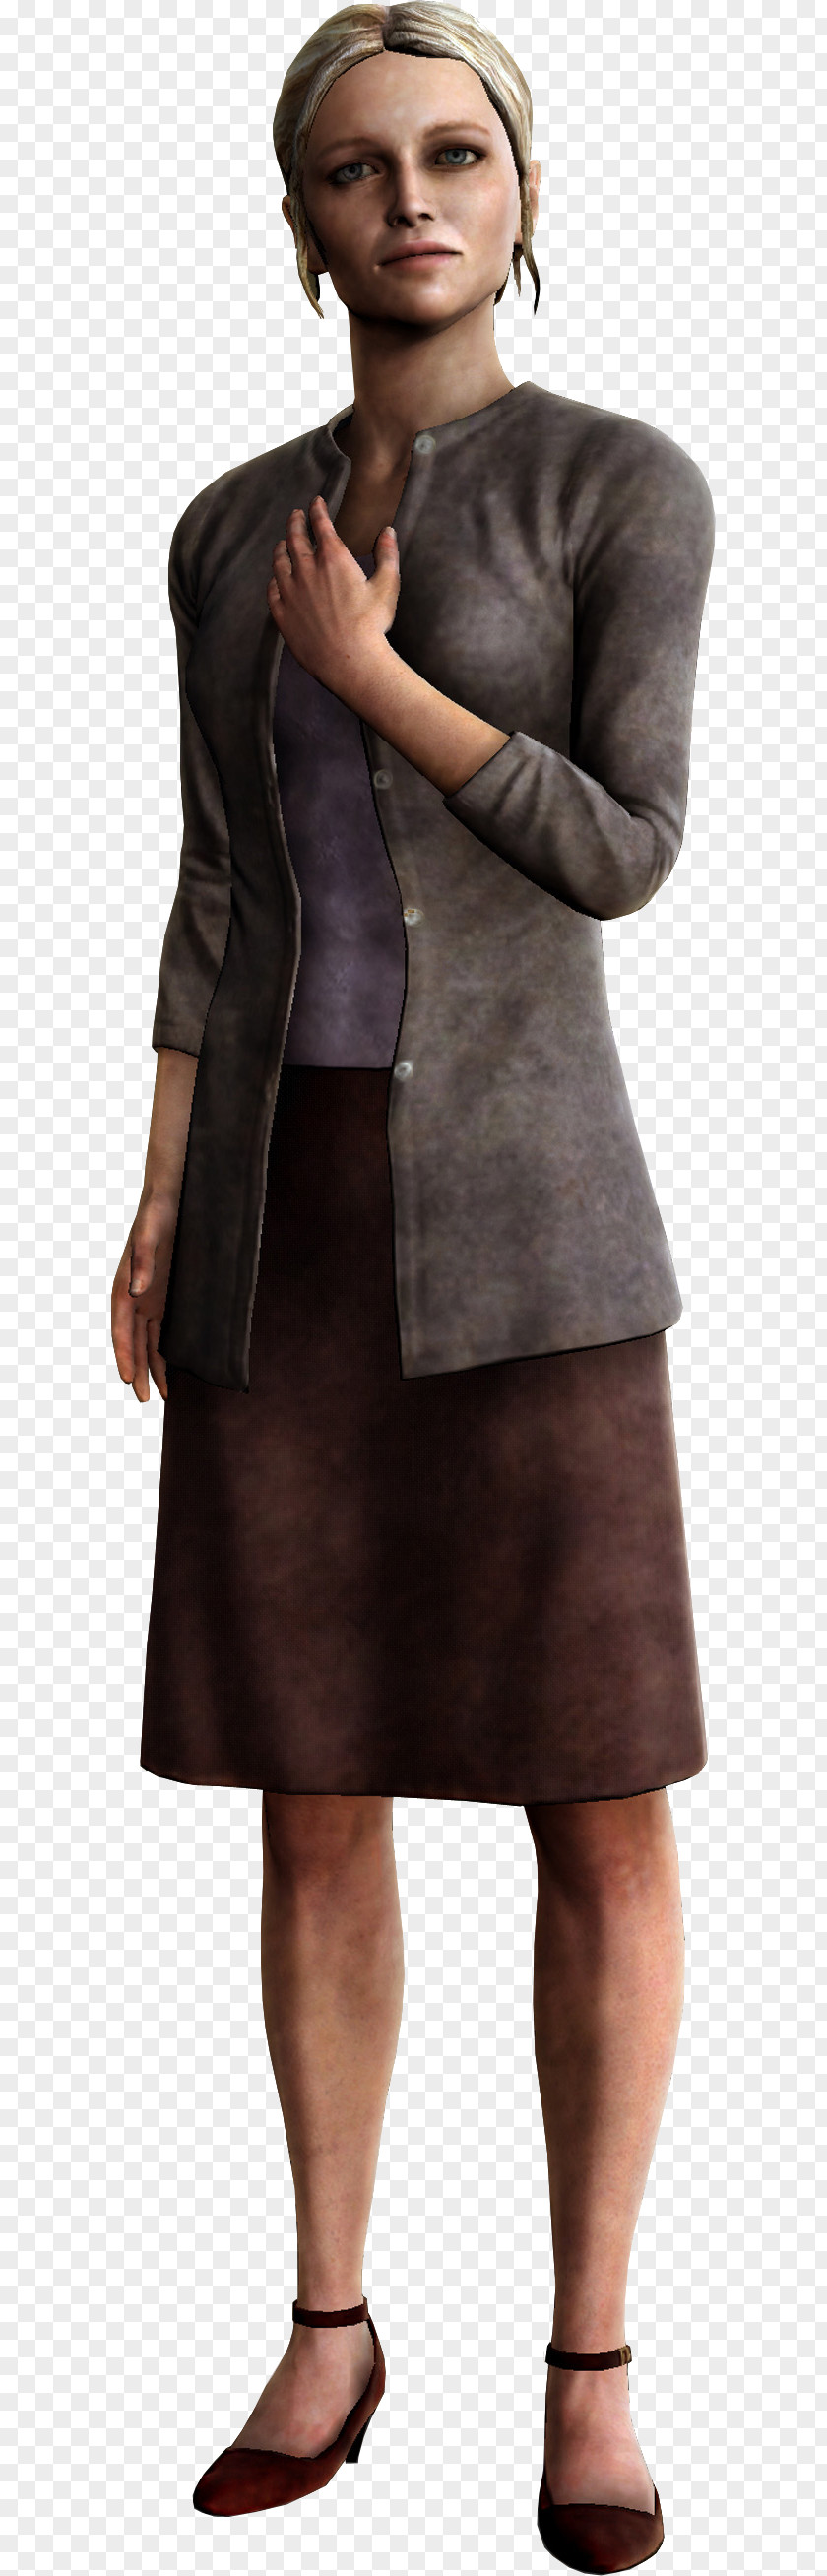 Silent Hill: Homecoming Hill 3 Dahlia Gillespie 4 PNG